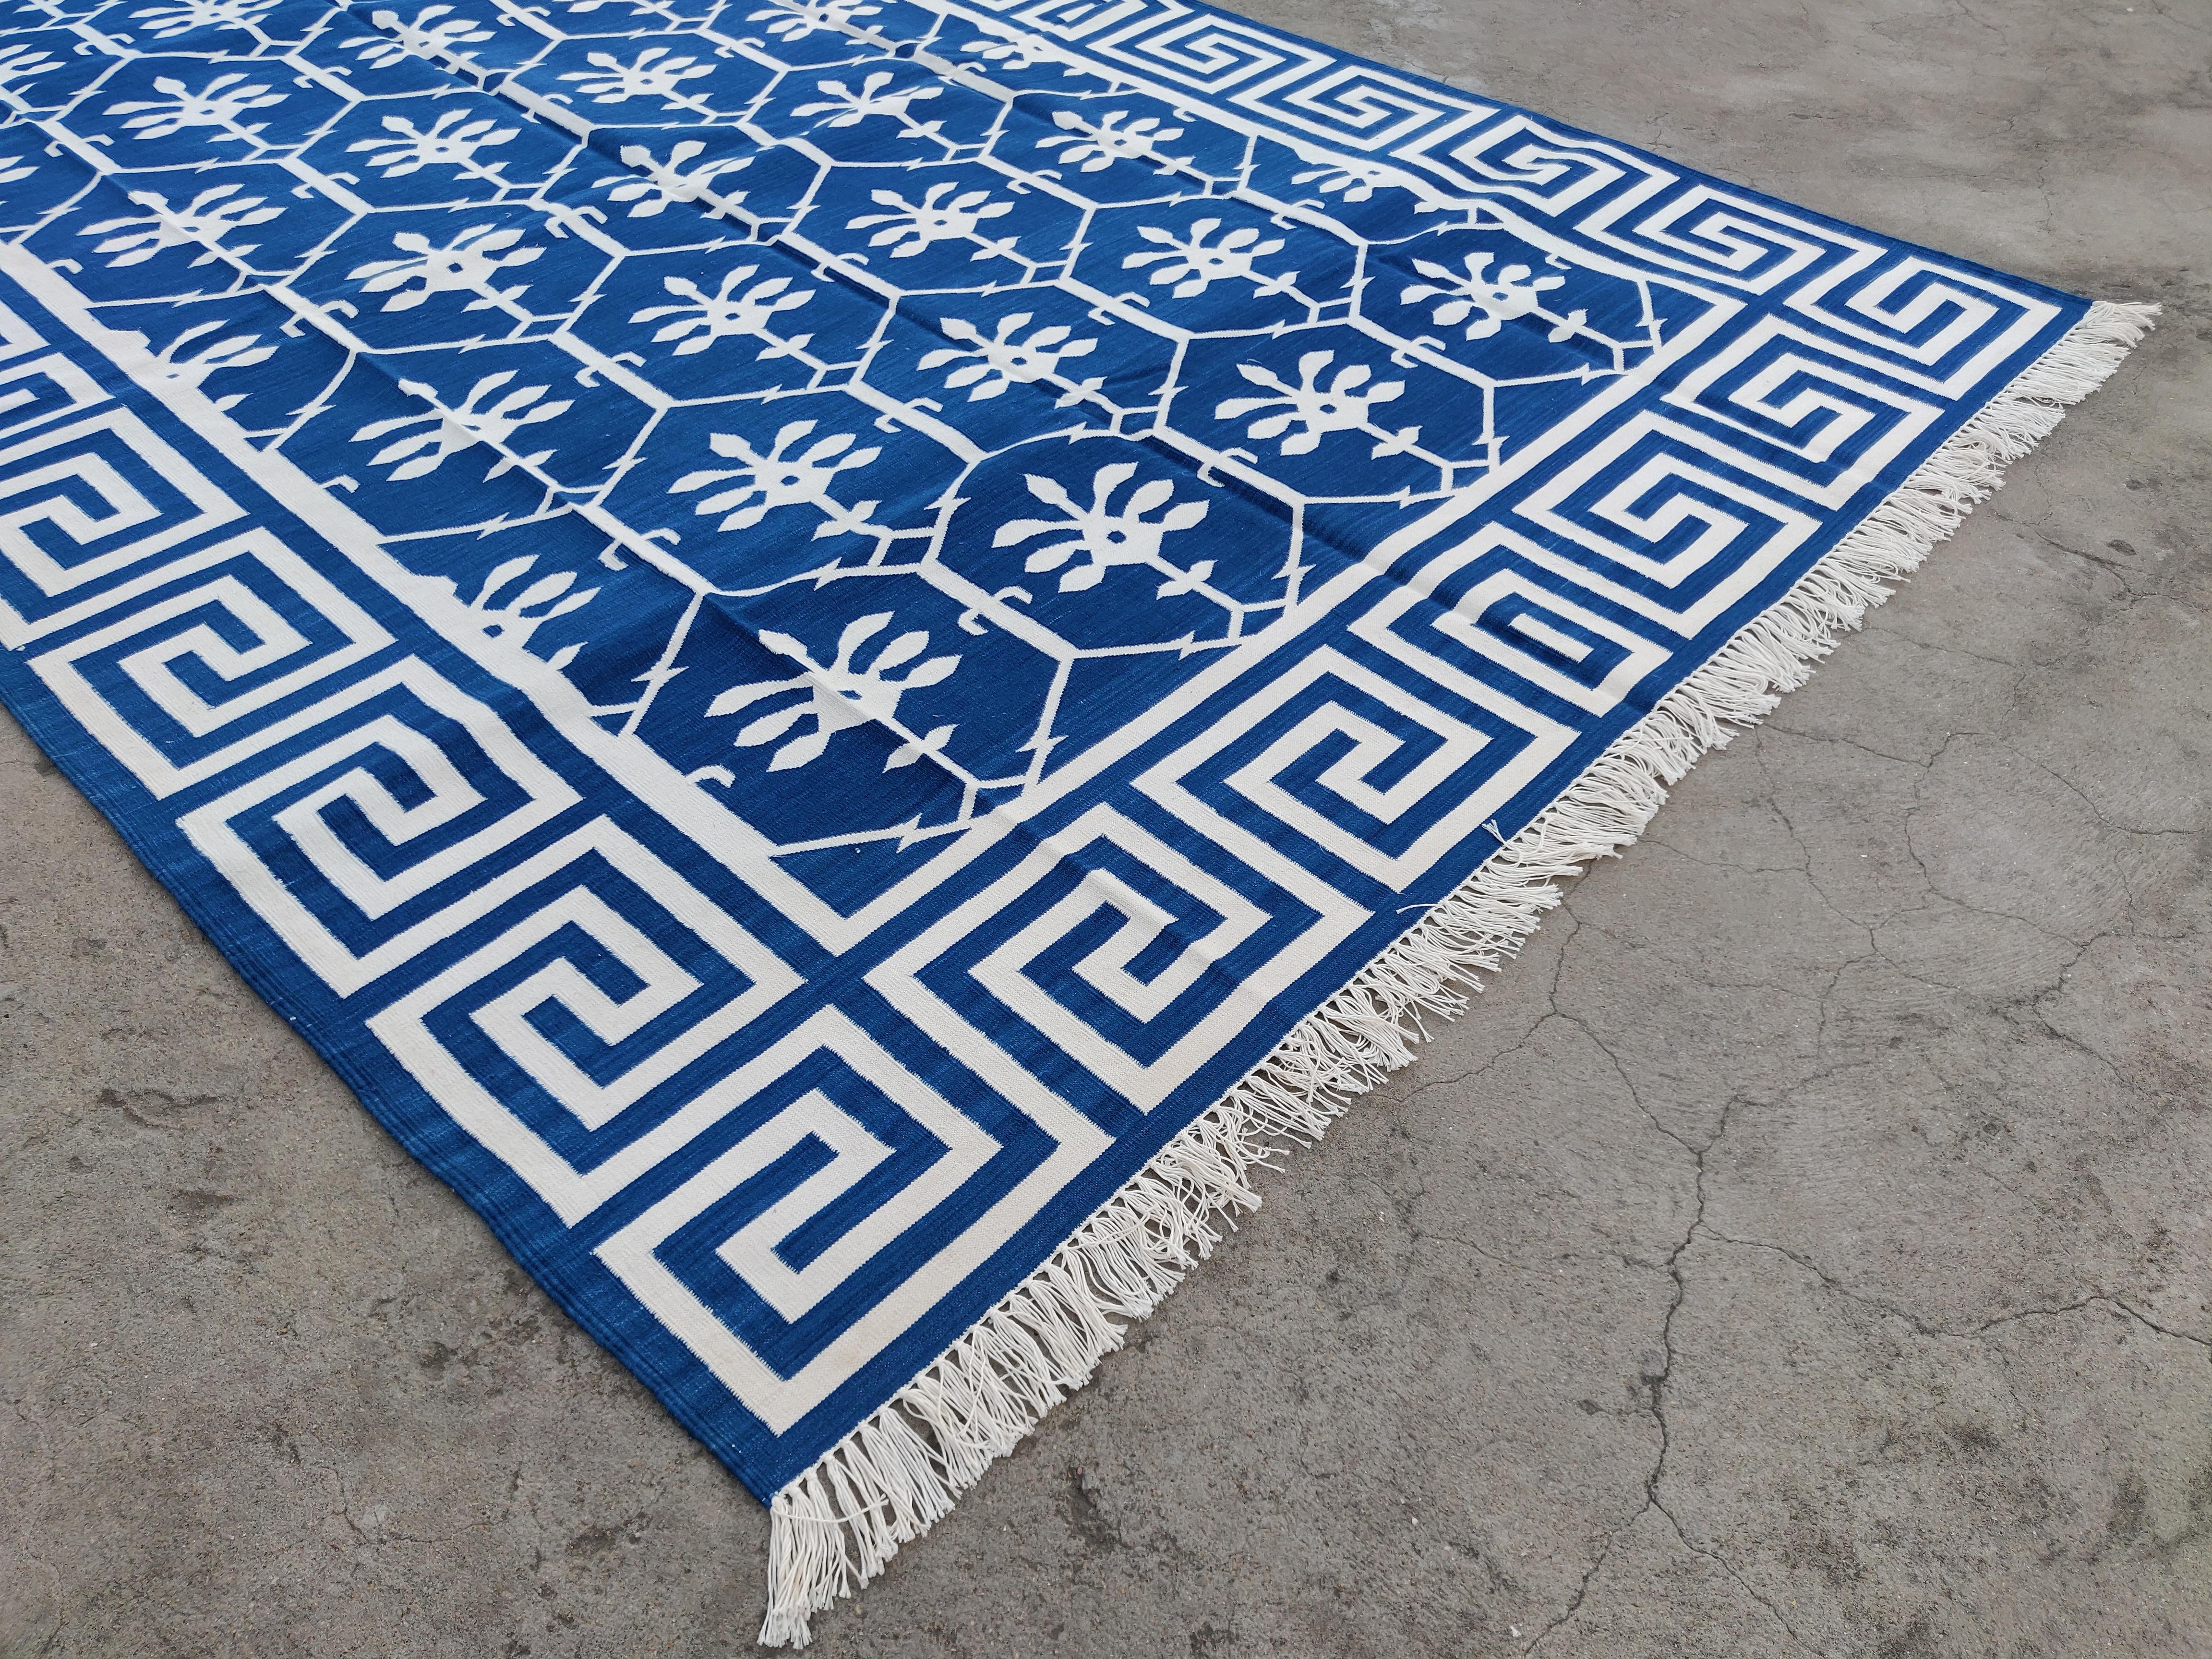 Mid-Century Modern Handmade Cotton Area Flat Weave Rug, Blue And White Flower Indian Dhurrie-6x9 For Sale